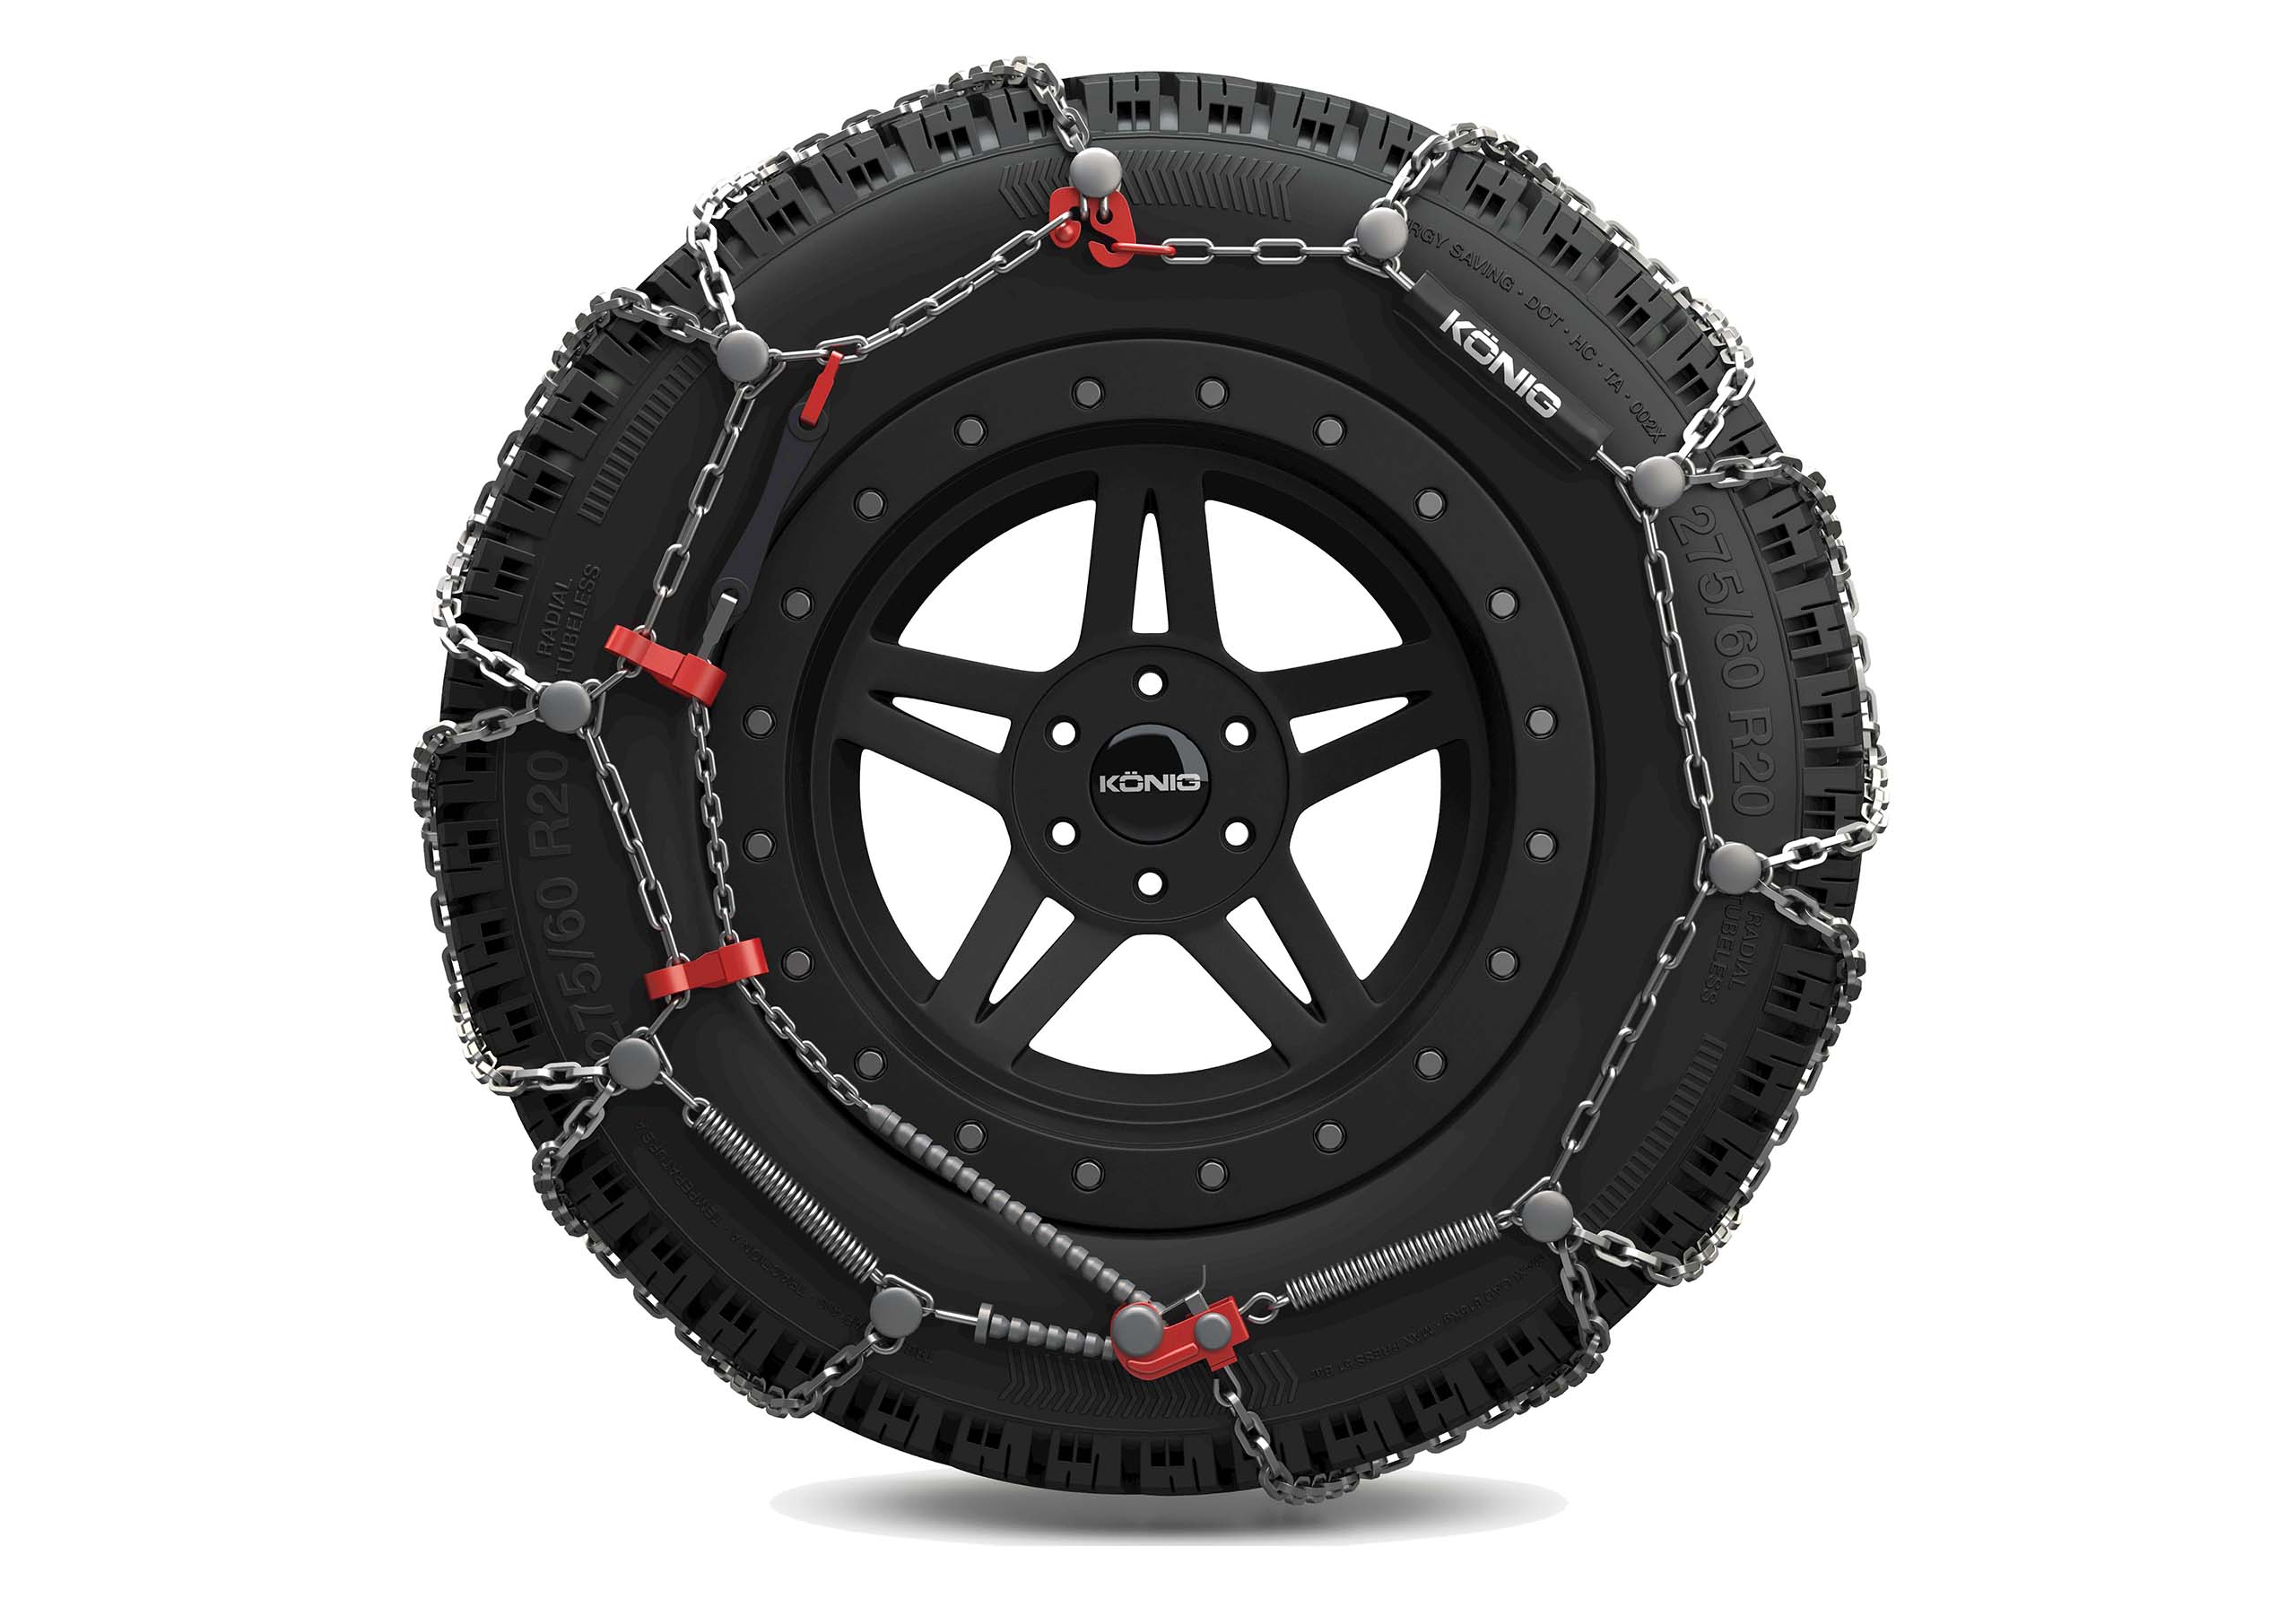 Mercedes Benz G-Wagon/G-Class (1980 to 2018):Knig XD-16 Pro snow chains (pair) no. XD-16 Pro 280